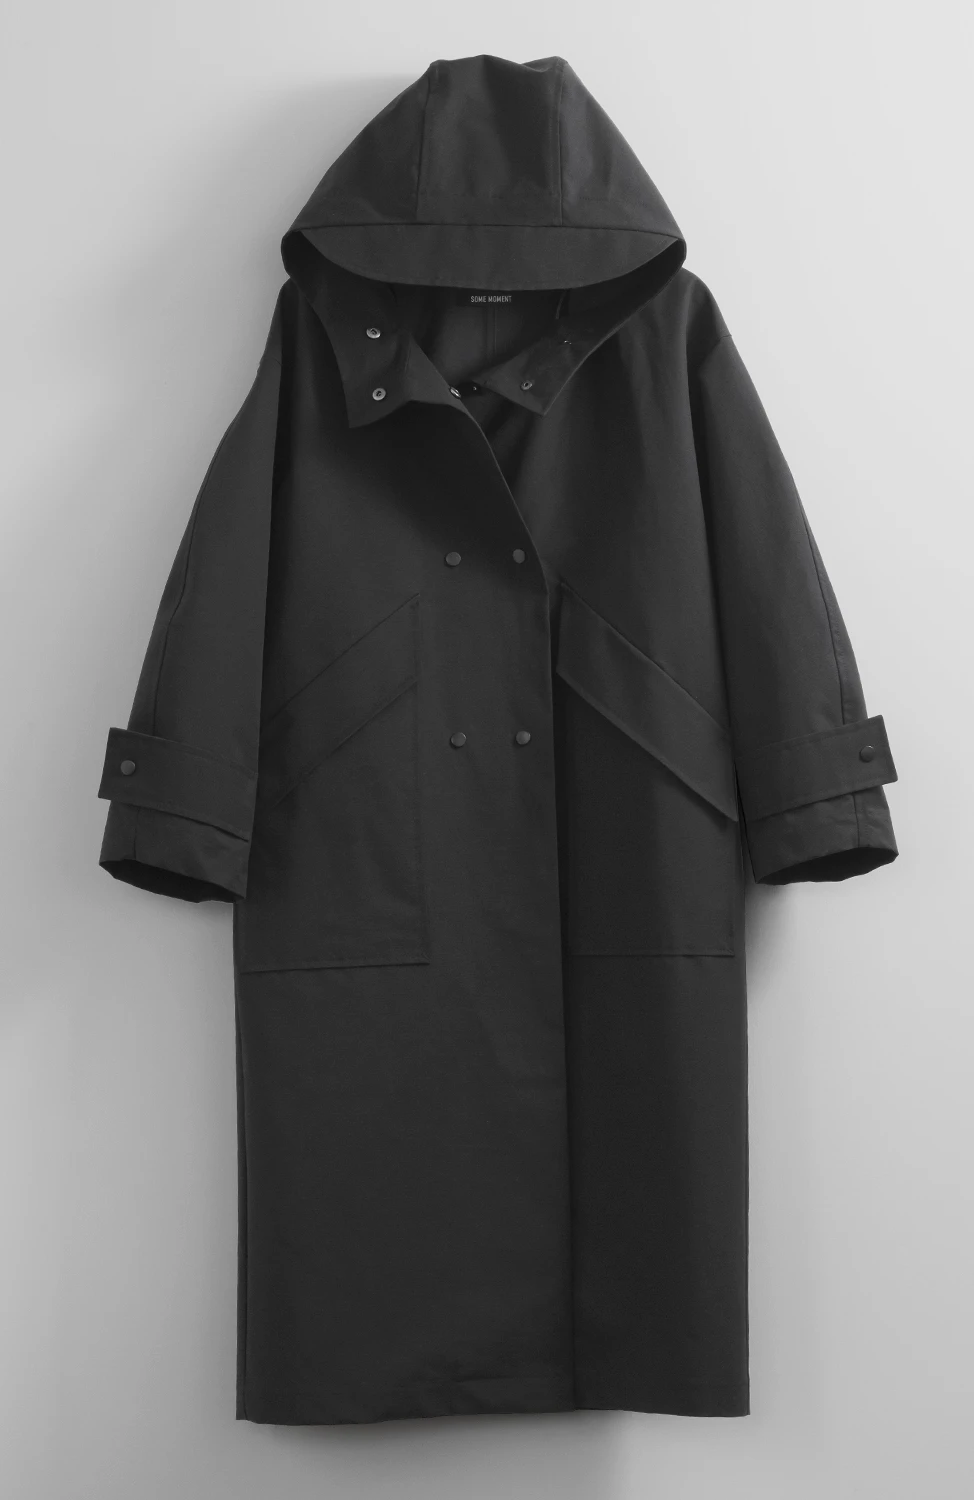 Stay Dry and Stylish with a Chic
Waterproof Coat: Effortlessly Chic and Practical